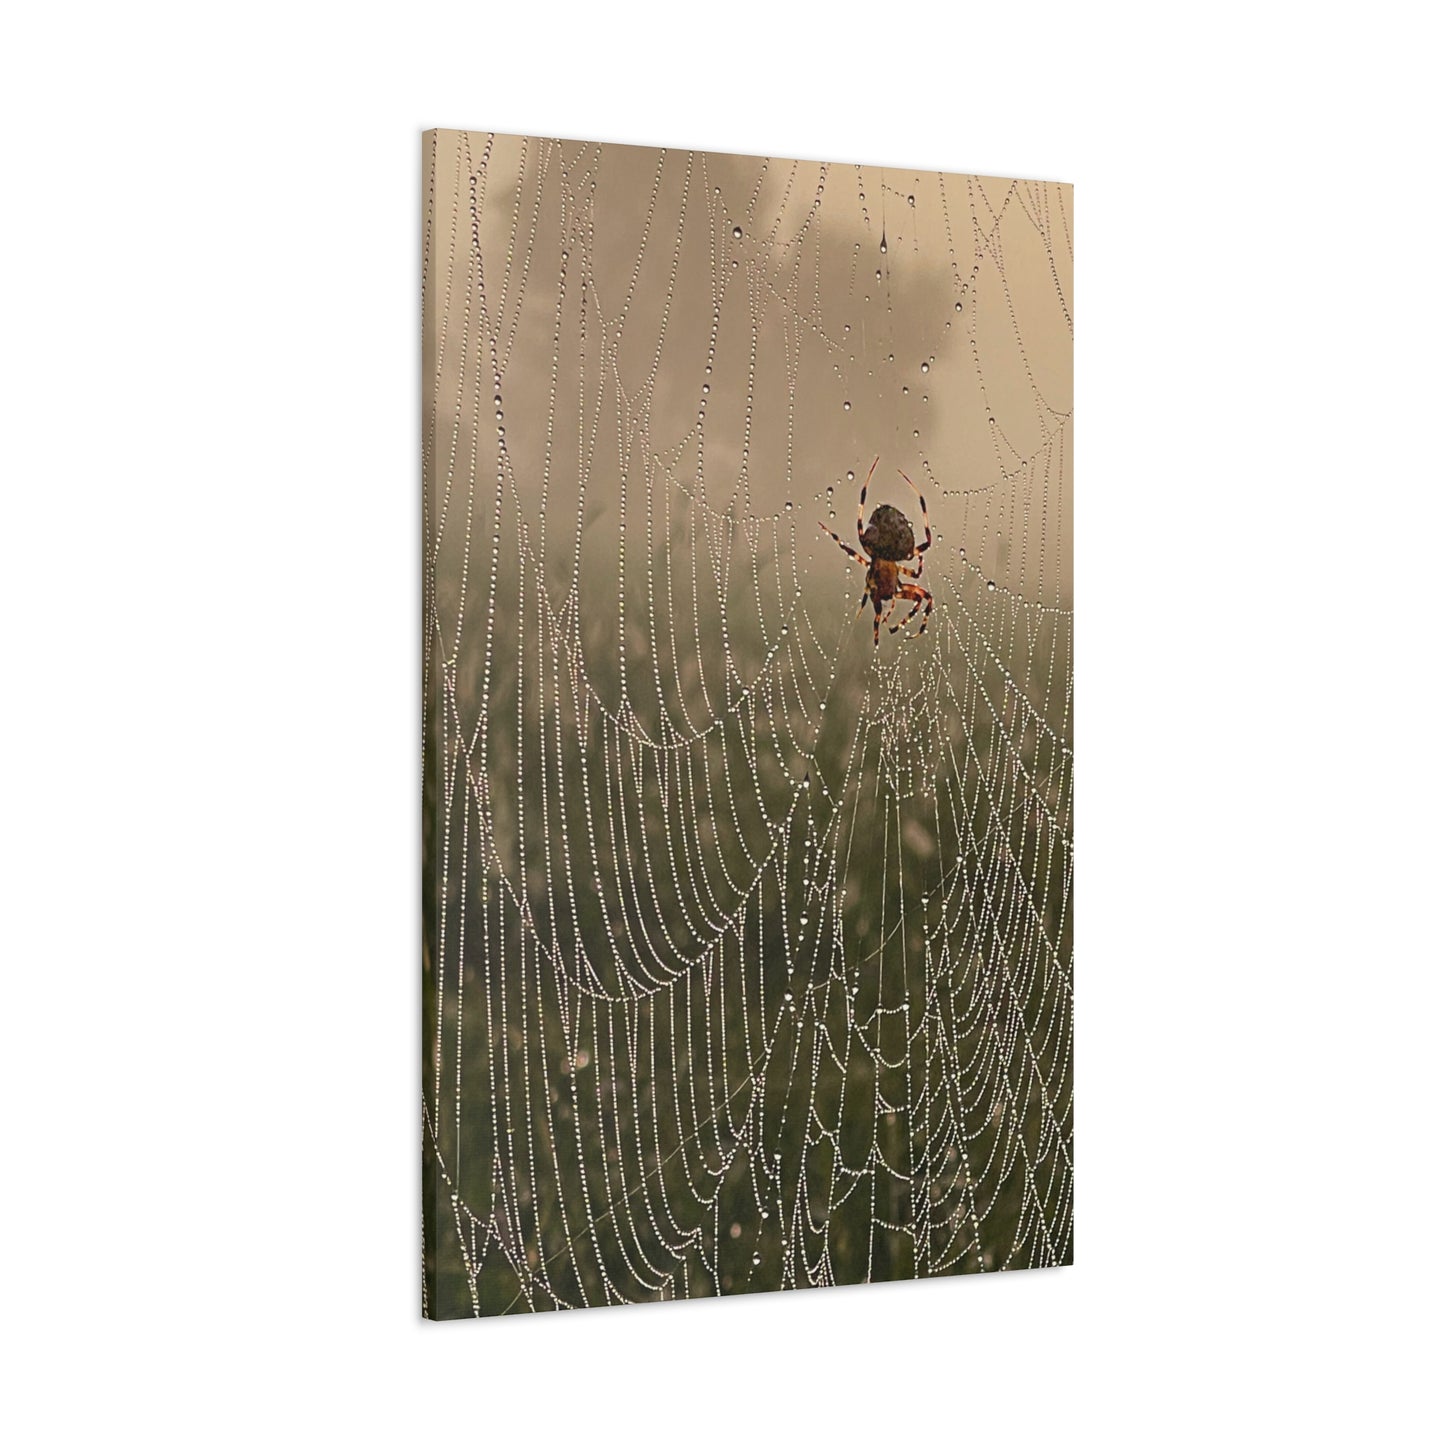 Spider on Dew-Soaked Web Canvas Print Spider Web Wall Decor Art Prints